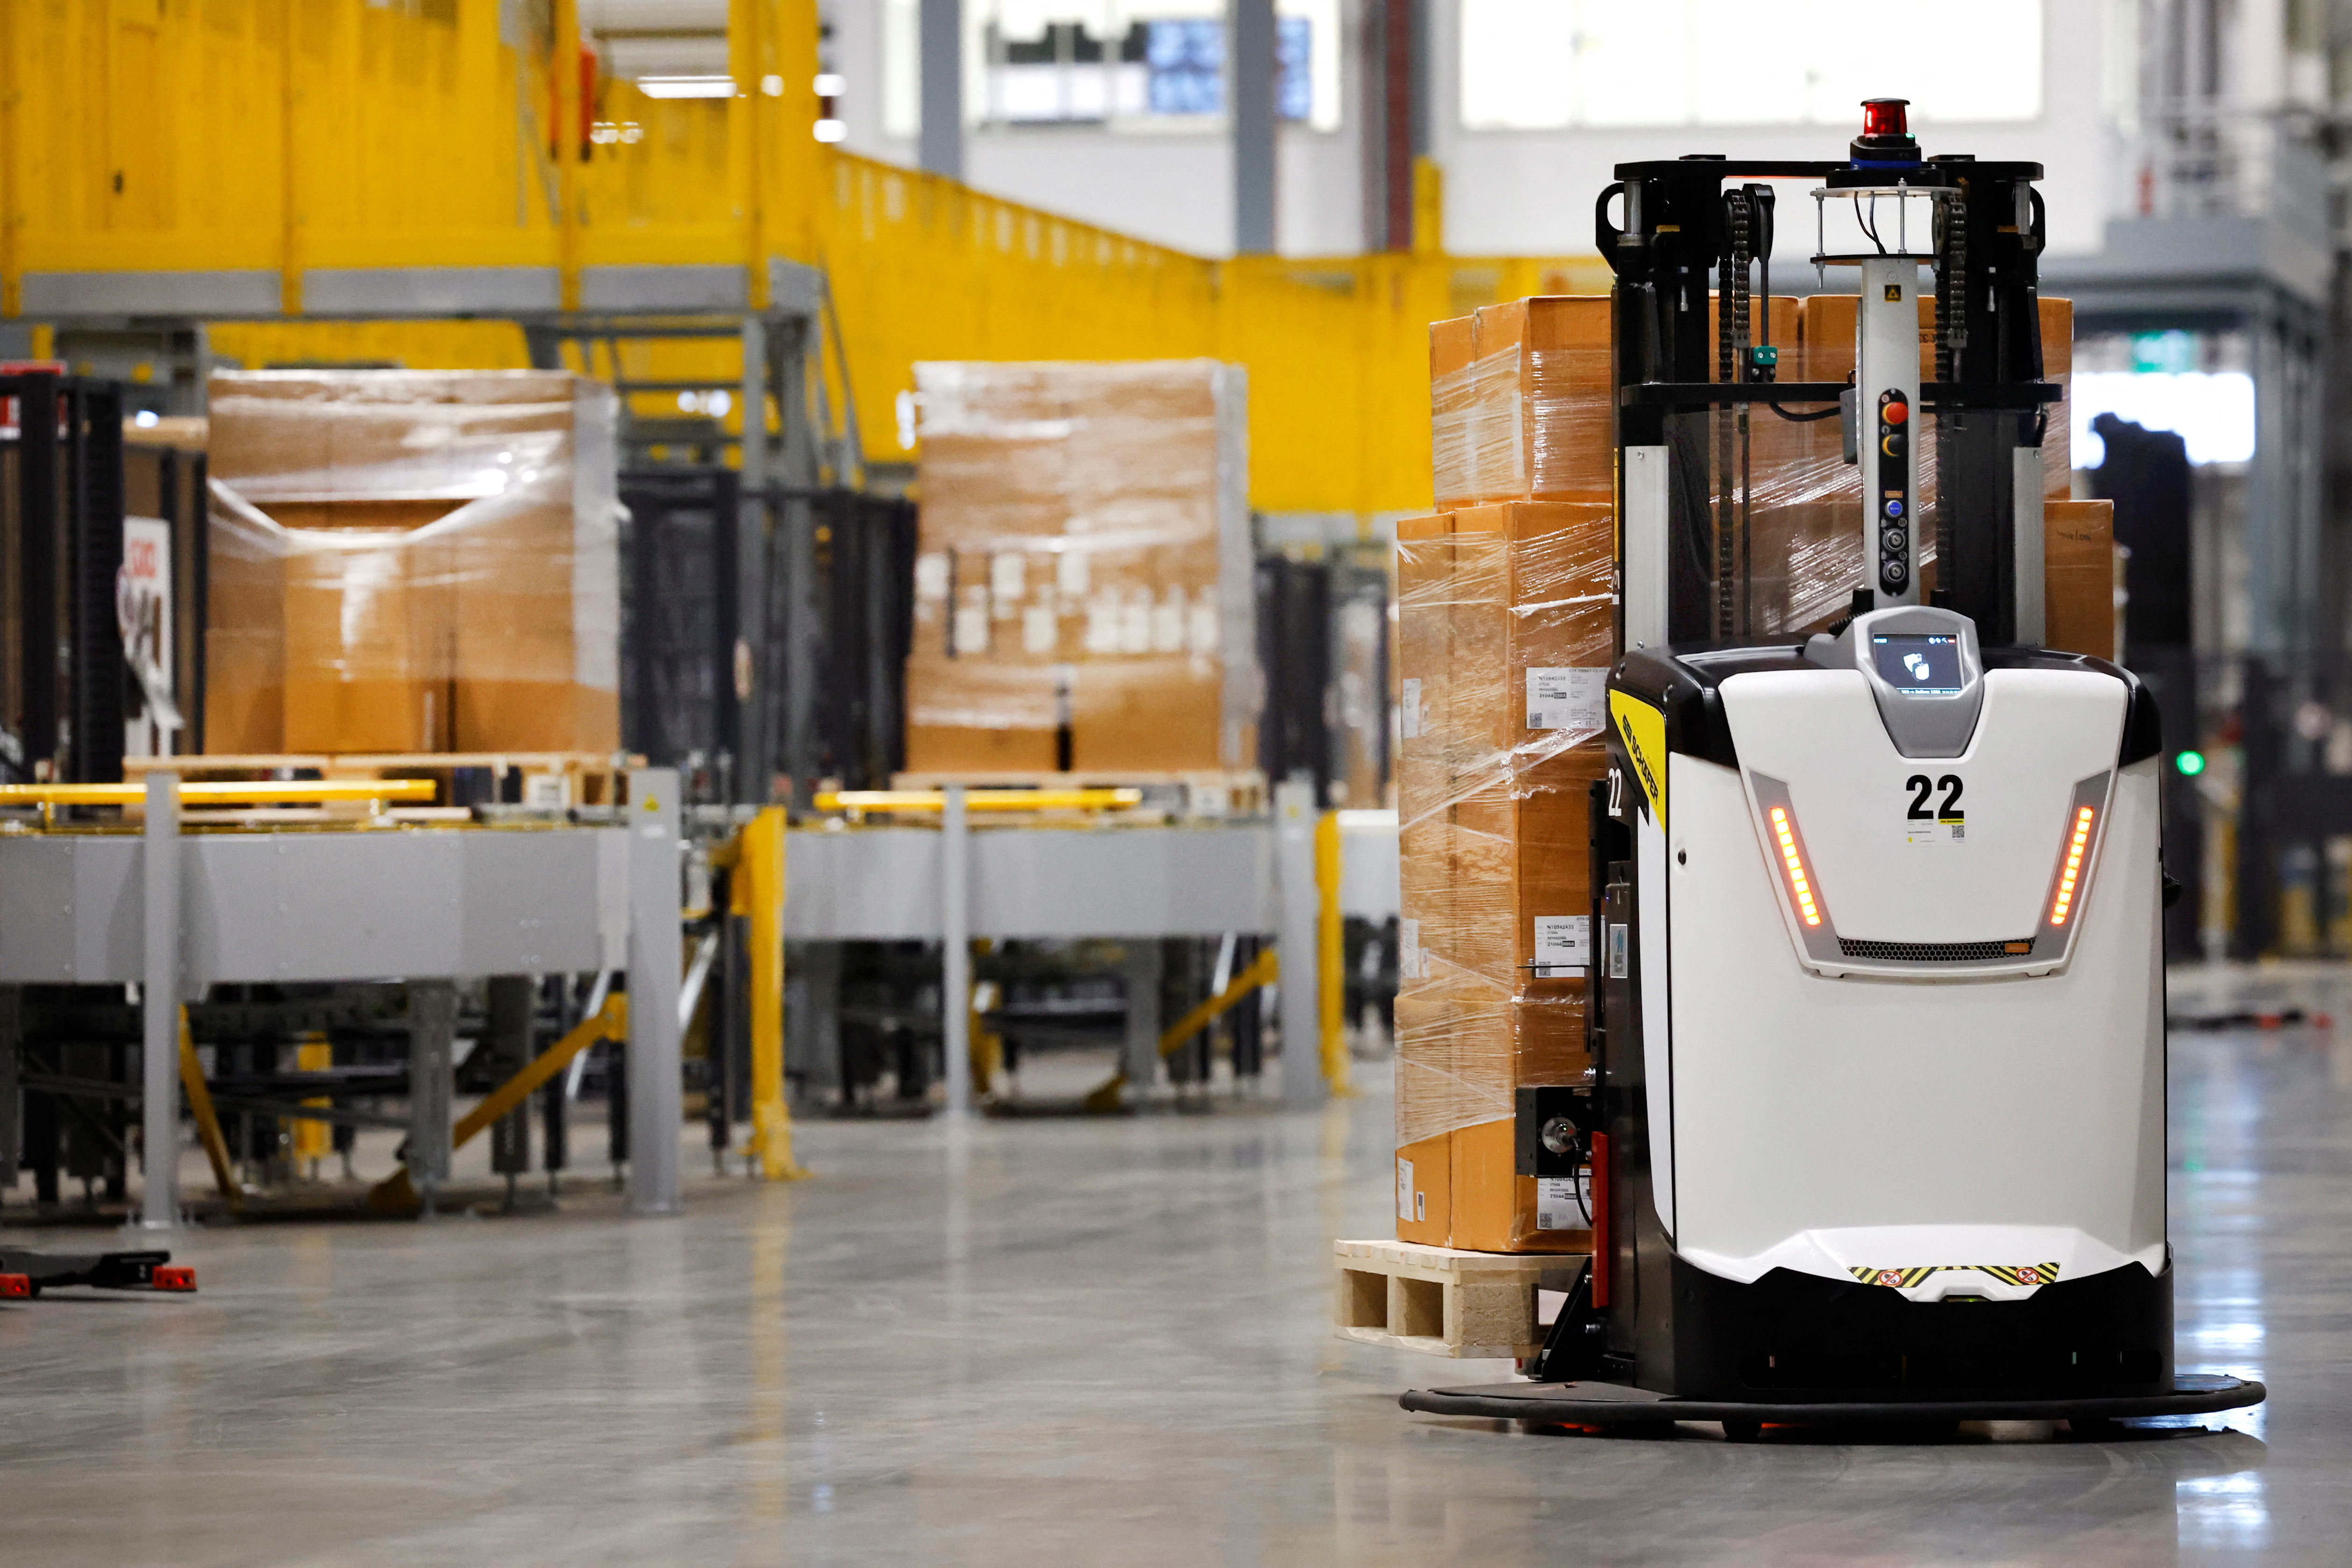 An autonomous guided vehicle is seen at Primark's warehouse in Roosendaal